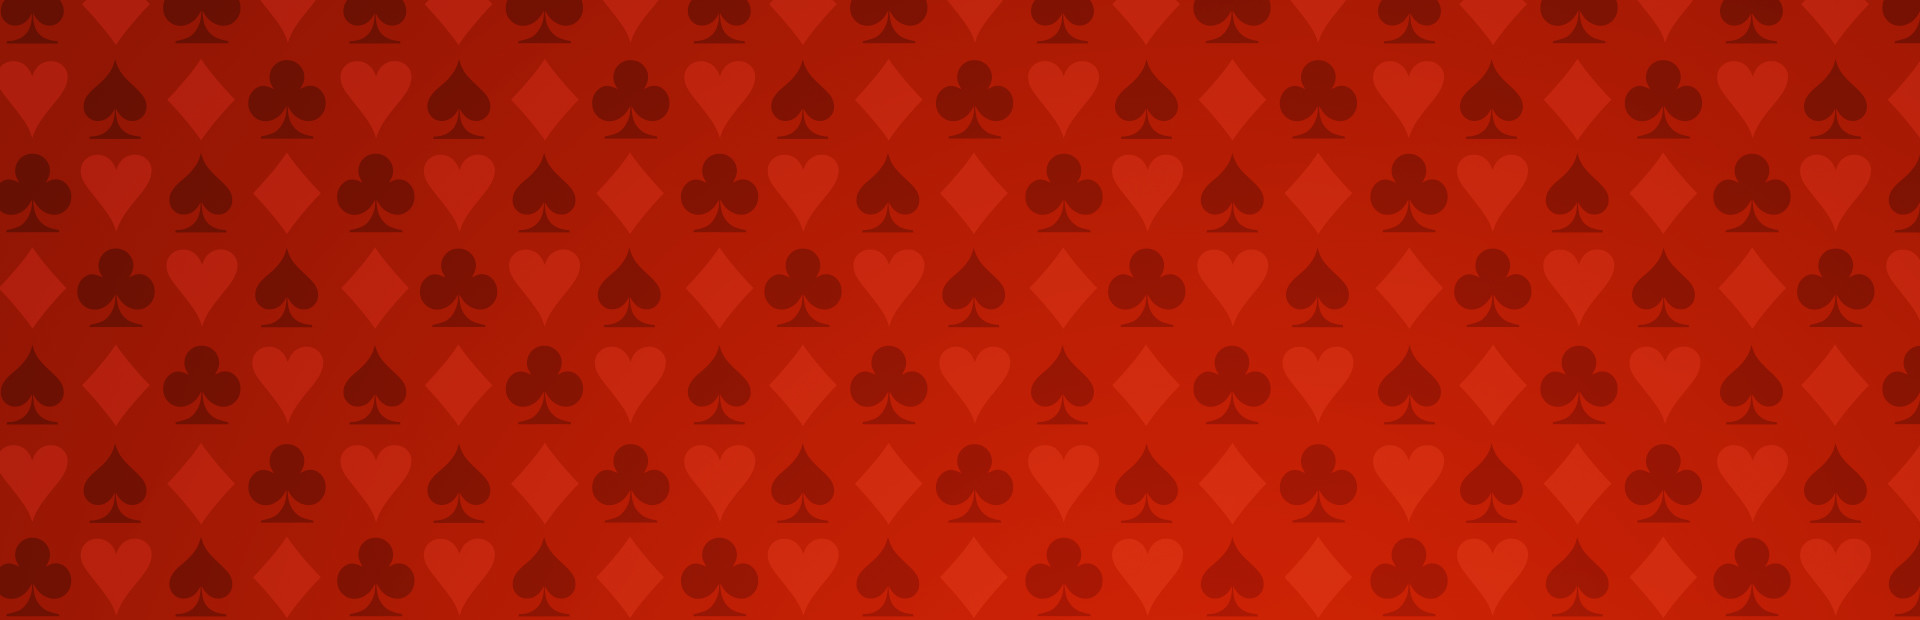 Classic Card Game Spades cover image